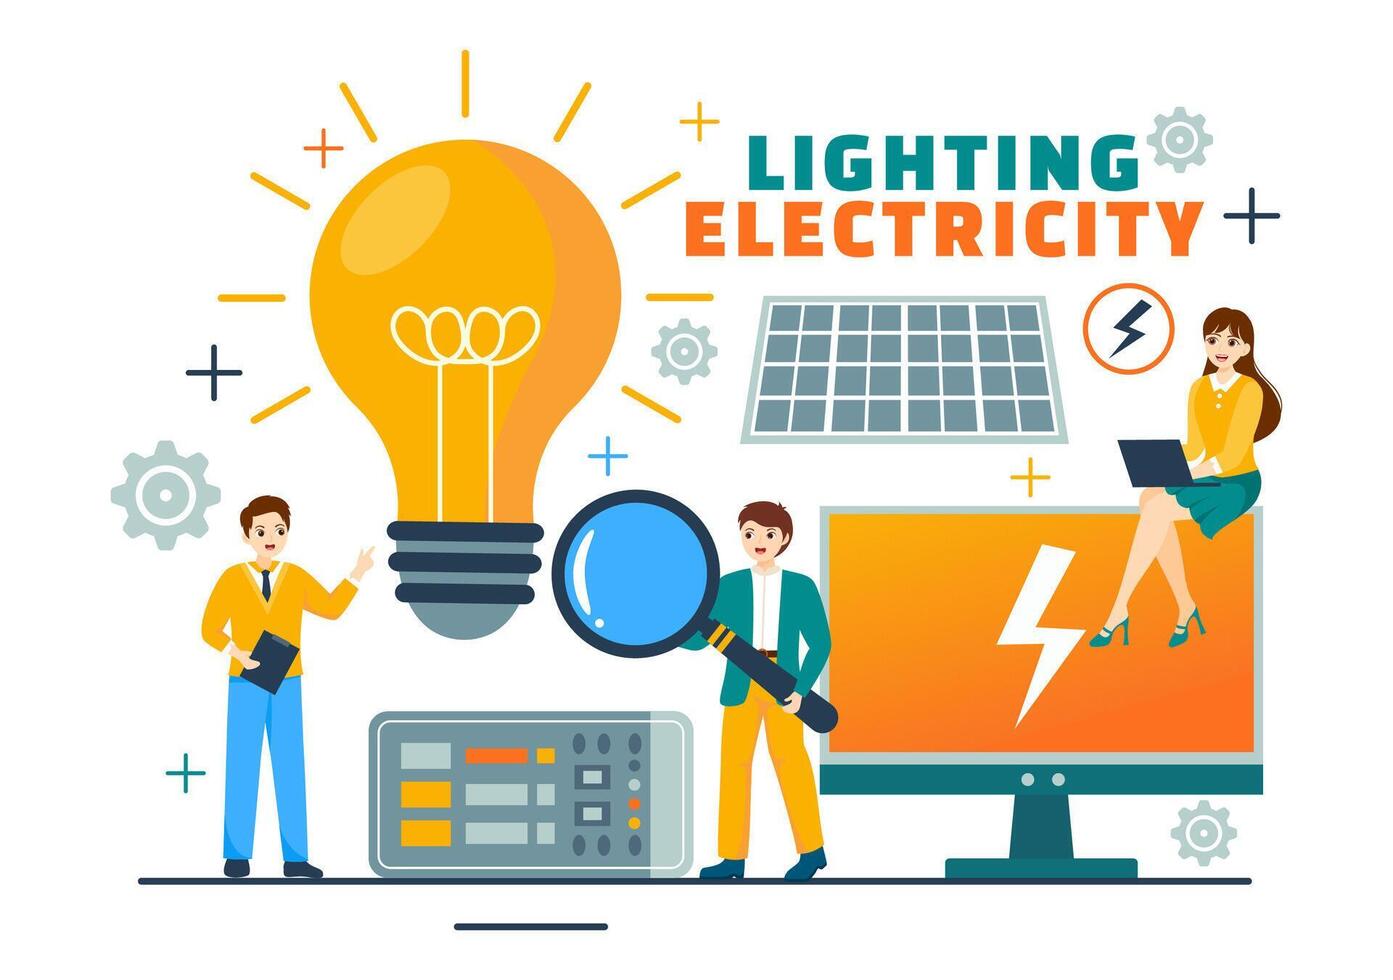 Lighting and Electricity Vector Illustration with Lamp and Energy Maintenance Service Panel Cabinet of Technician Electrical Work on Flat Background